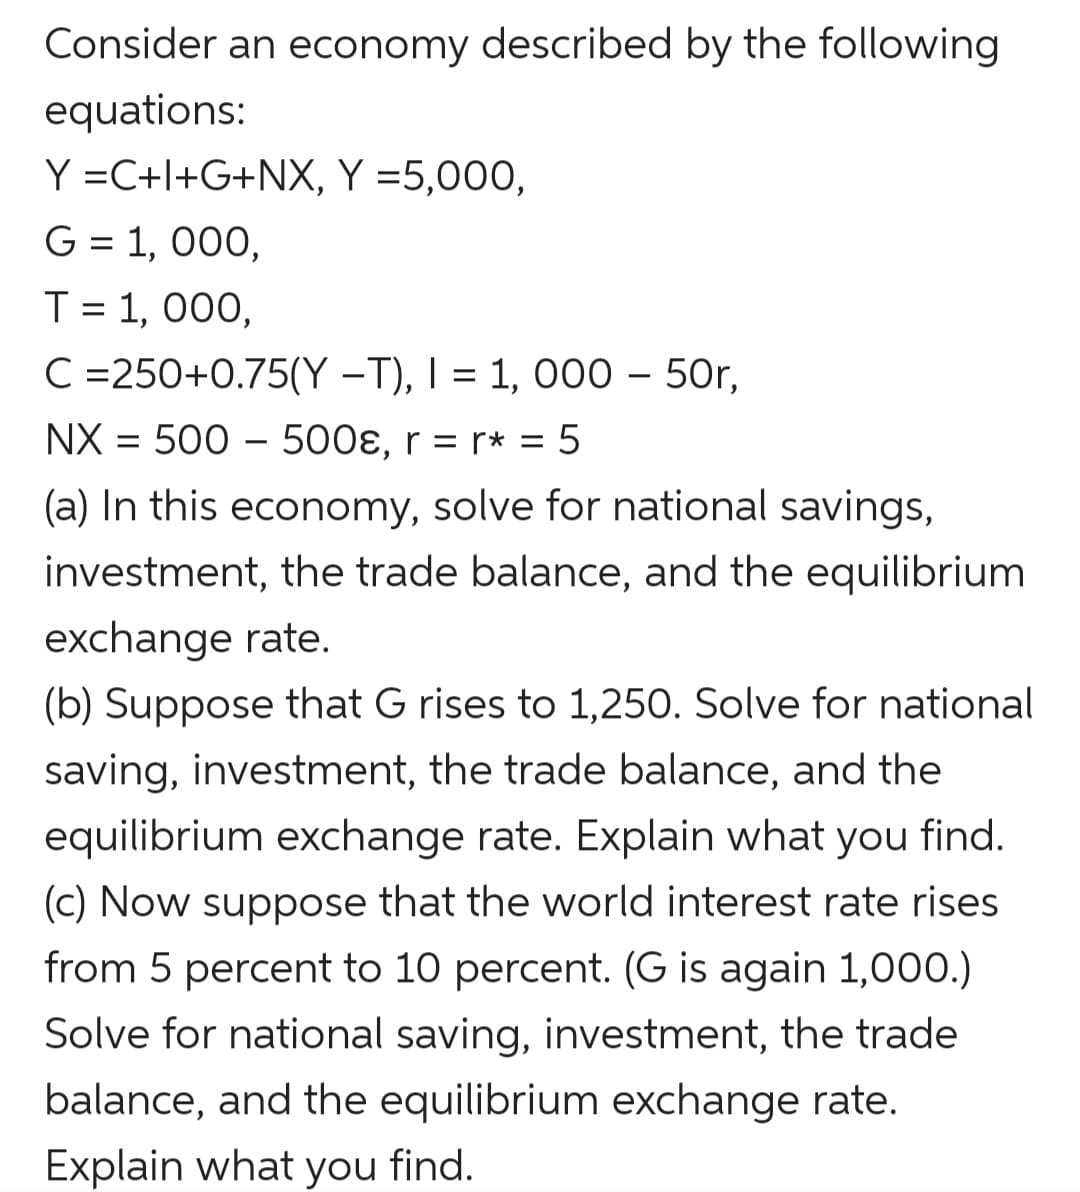 Consider an economy described by the following
equations:
Y =C+l+G+NX, Y =5,000,
G = 1, 000,
T = 1, 000,
C =250+0.75(Y –T), I = 1, 000 – 50r,
NX = 500 – 500ɛ, r = r* = 5
(a) In this economy, solve for national savings,
investment, the trade balance, and the equilibrium
exchange rate.
(b) Suppose that G rises to 1,250. Solve for national
saving, investment, the trade balance, and the
equilibrium exchange rate. Explain what you find.
(c) Now suppose that the world interest rate rises
from 5 percent to 10 percent. (G is again 1,000.)
Solve for national saving, investment, the trade
balance, and the equilibrium exchange rate.
Explain what you find.
